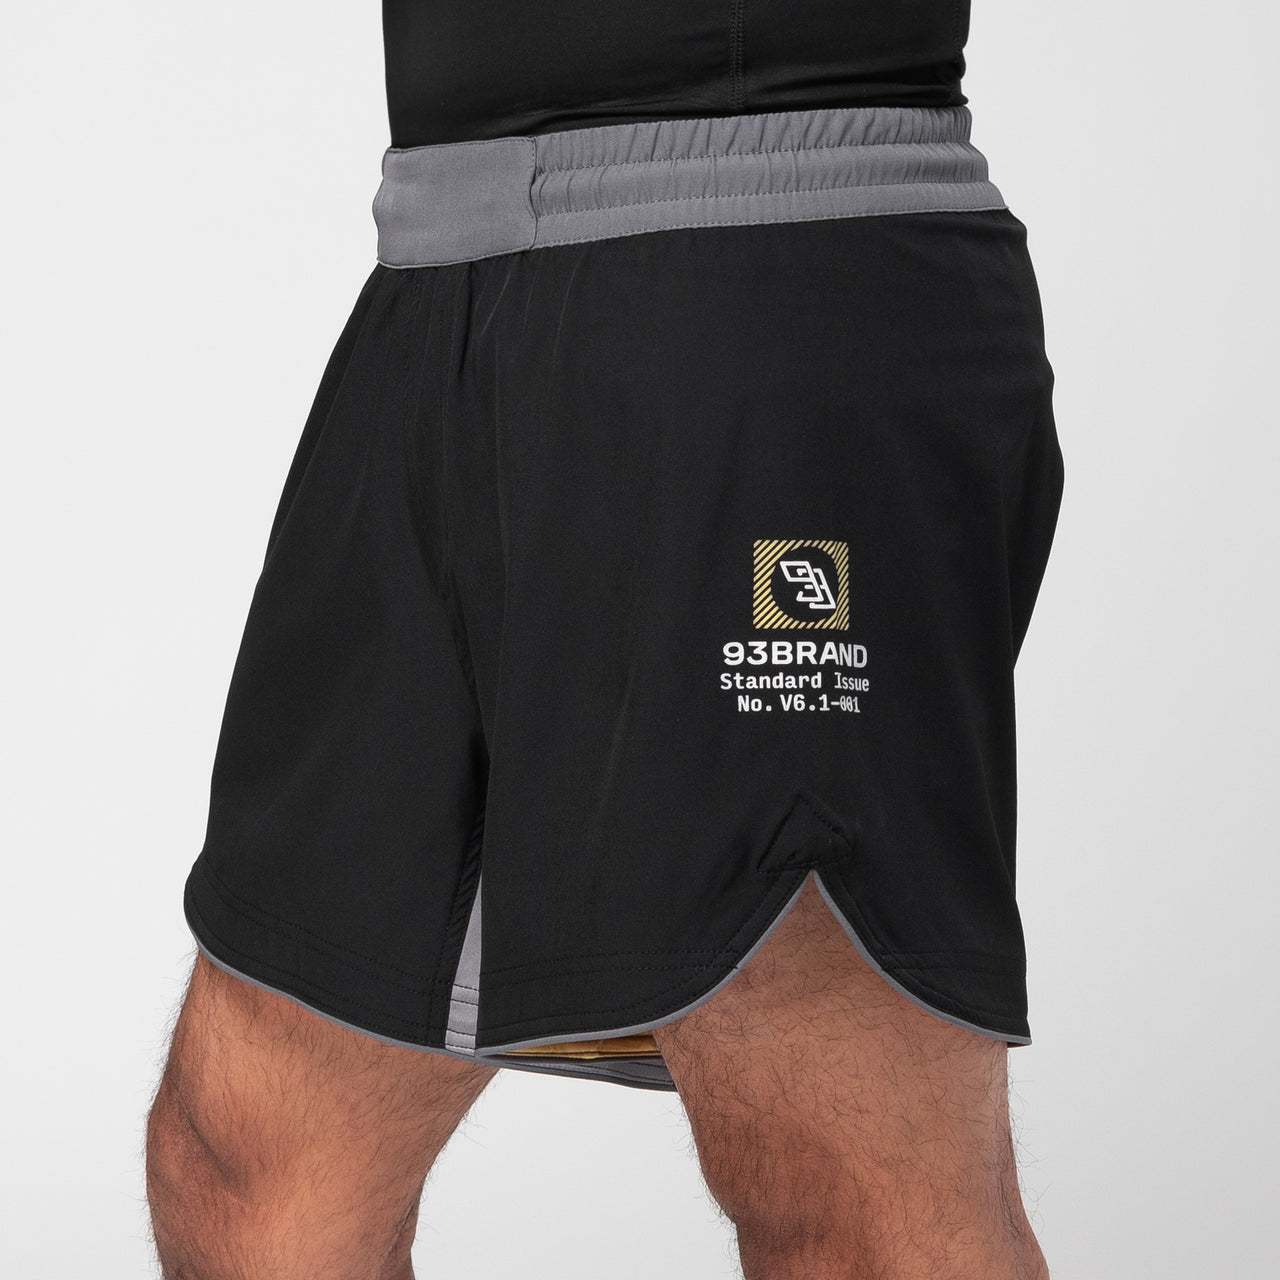 93brand Standard Issue Grappling Shorts 2PACK (Shorter Length) - Black/Yellow & Grey/Red